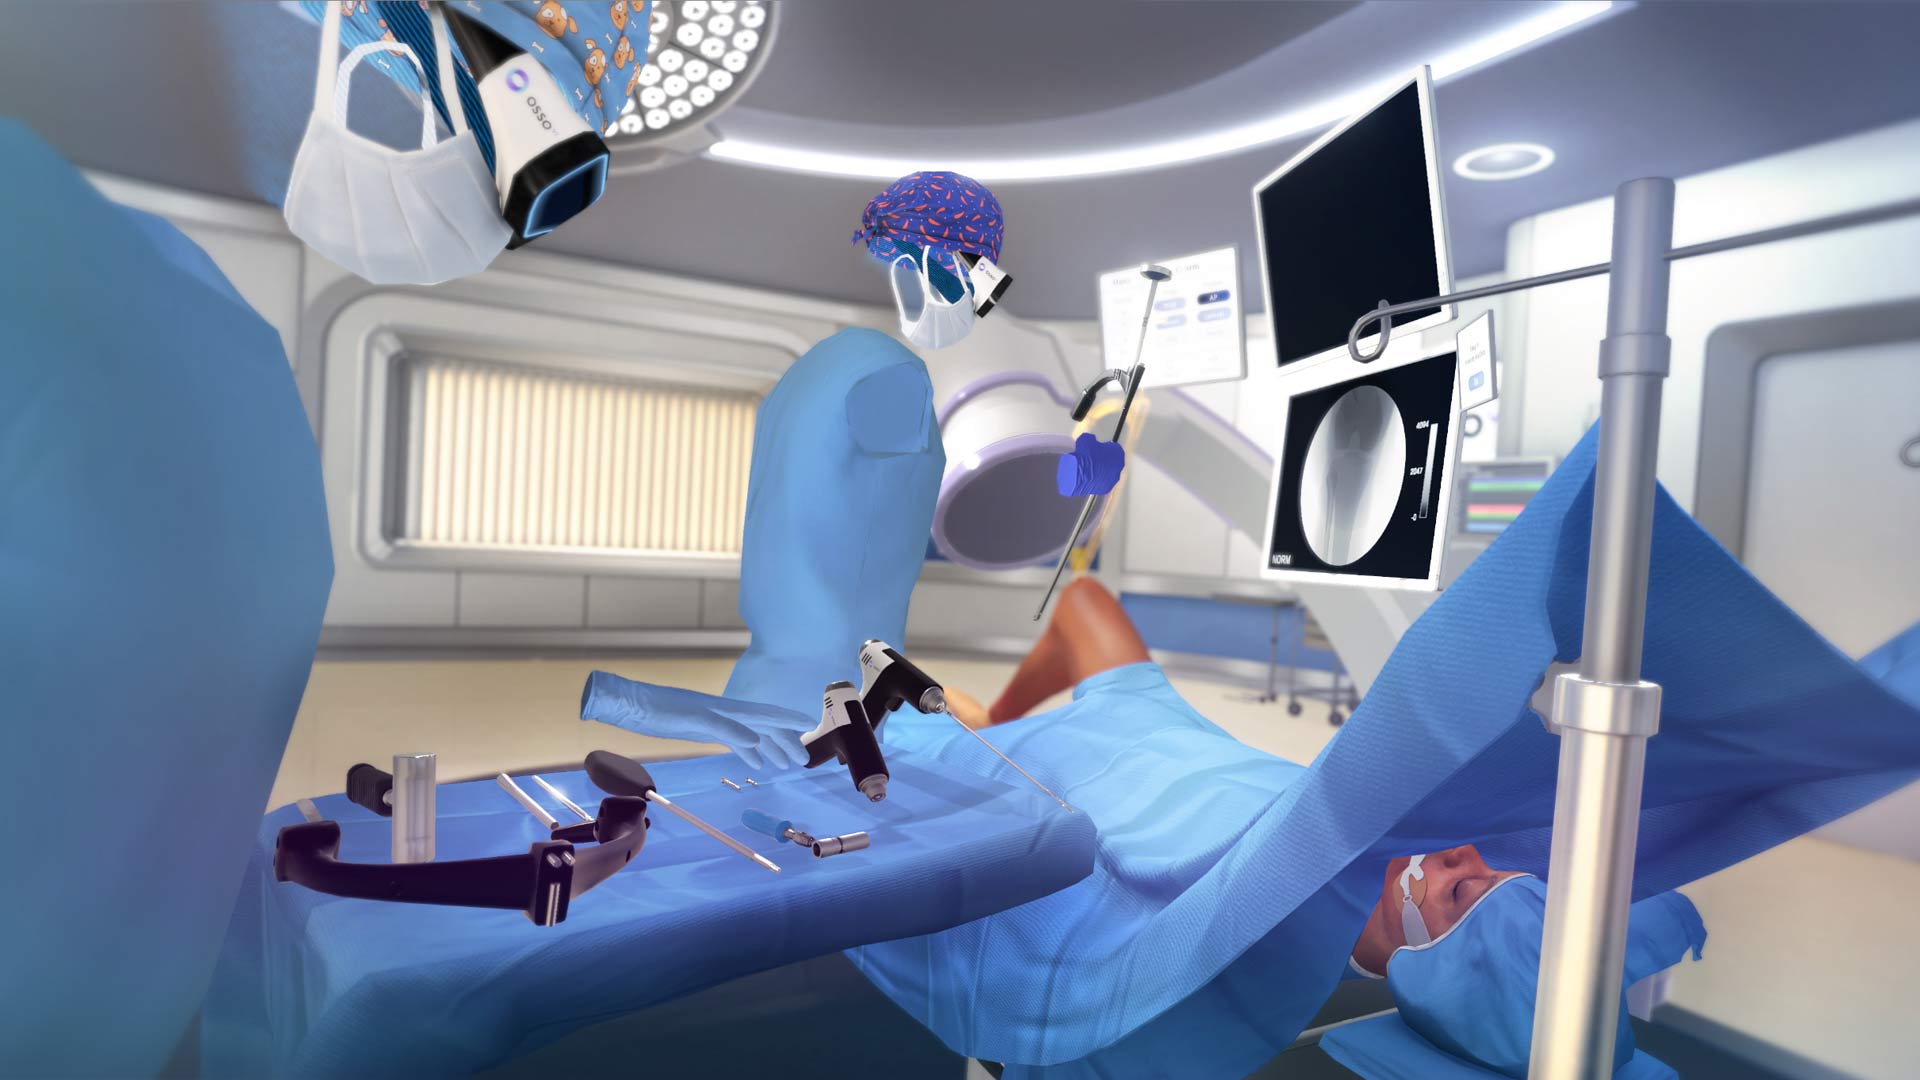 Surgery Training Platform 'Osso VR' Secures $66M Series C Financing